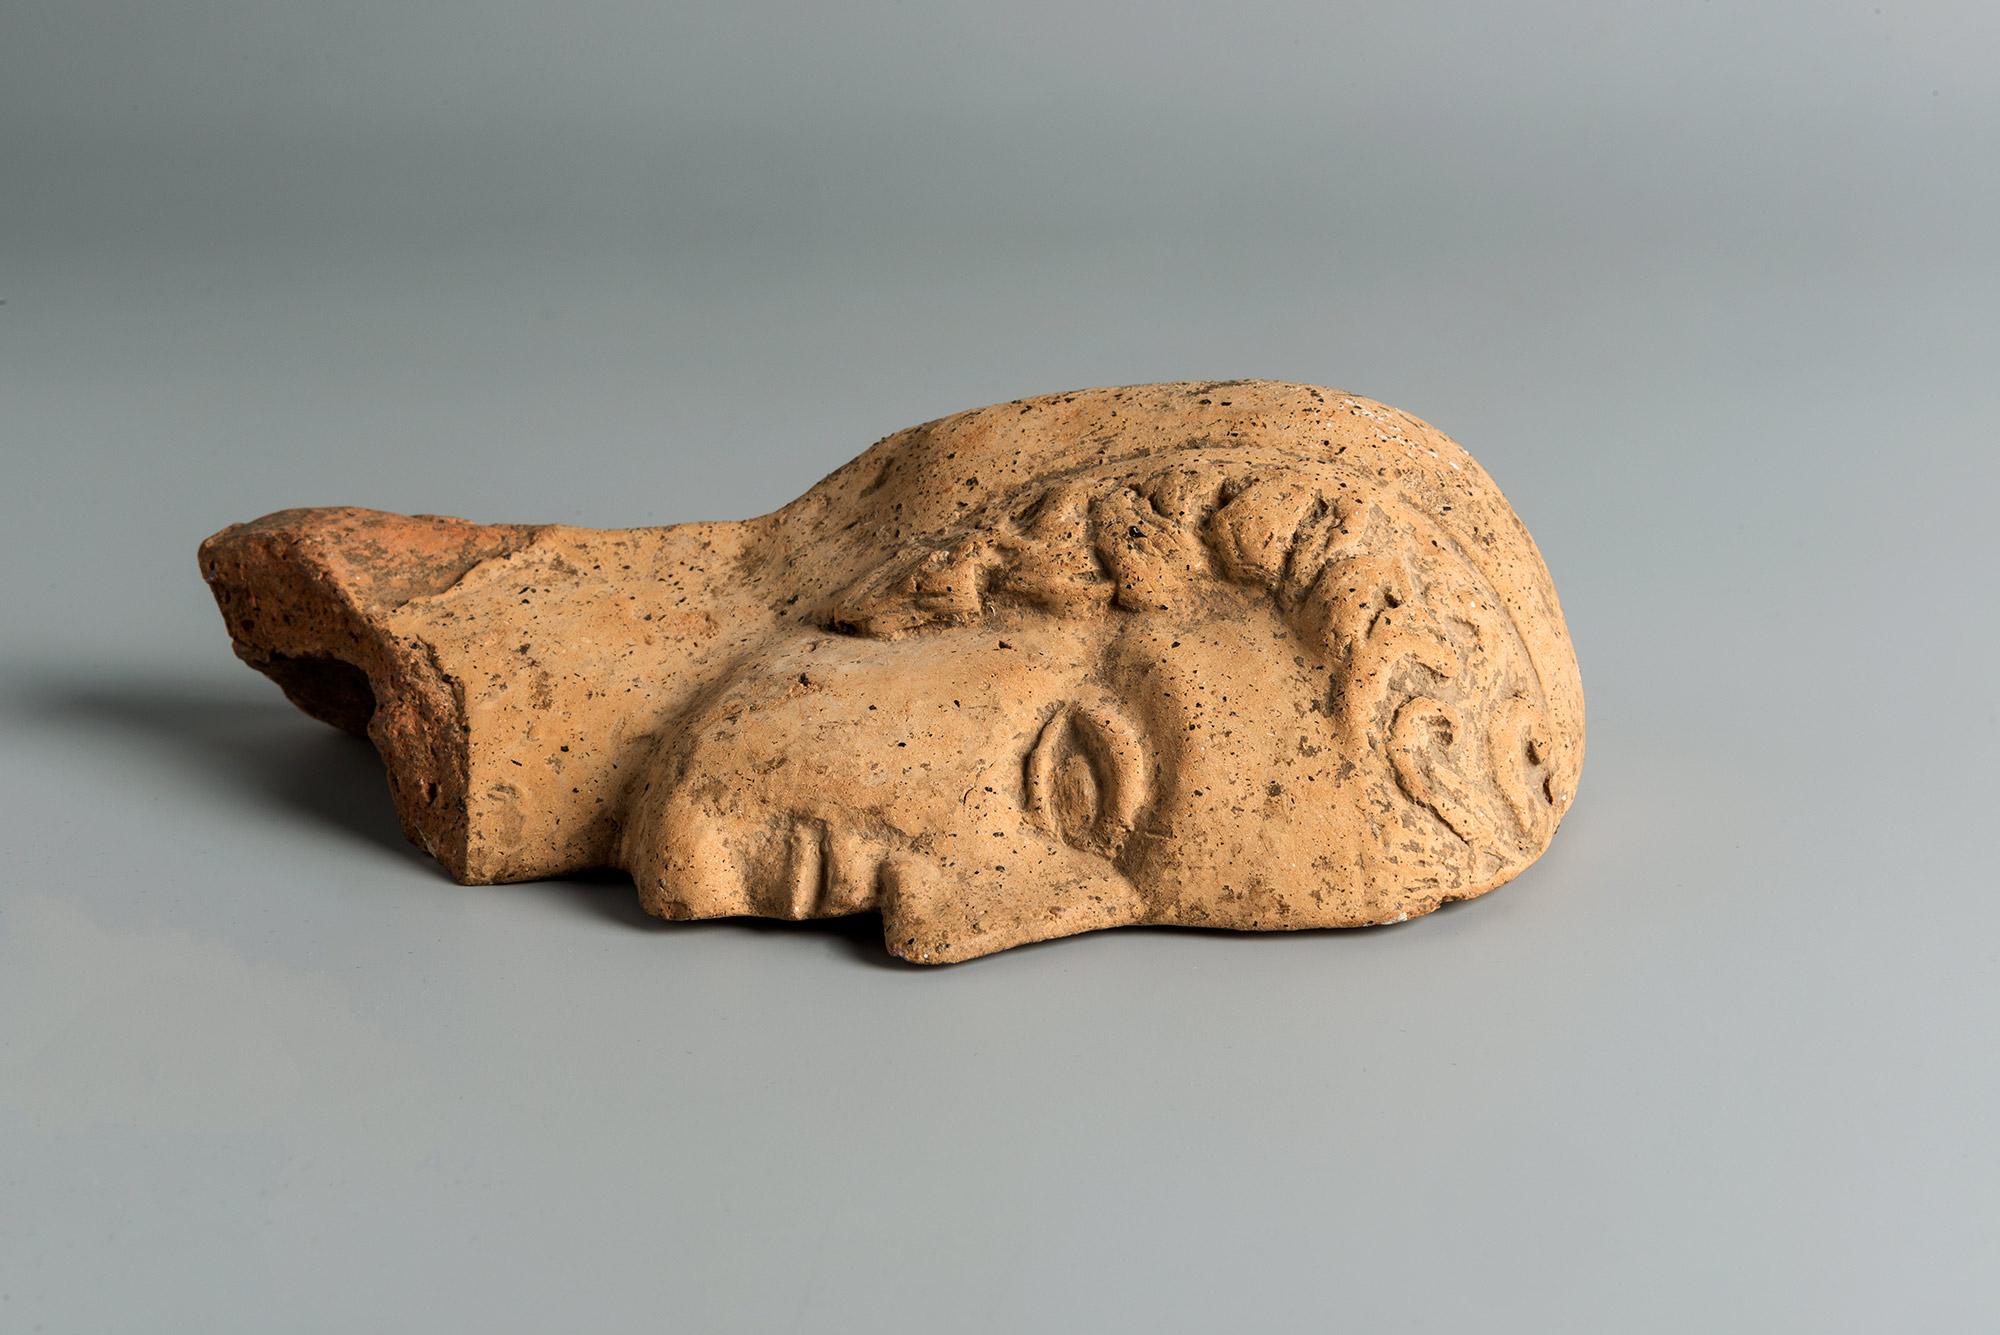 The Votive shows a female head in profile. The face with the almond shape eye is finely detailed with her curled hair coming from under a veil. On the reverse the Votive is hollow where a hook is attached for hanging. The object is intact as